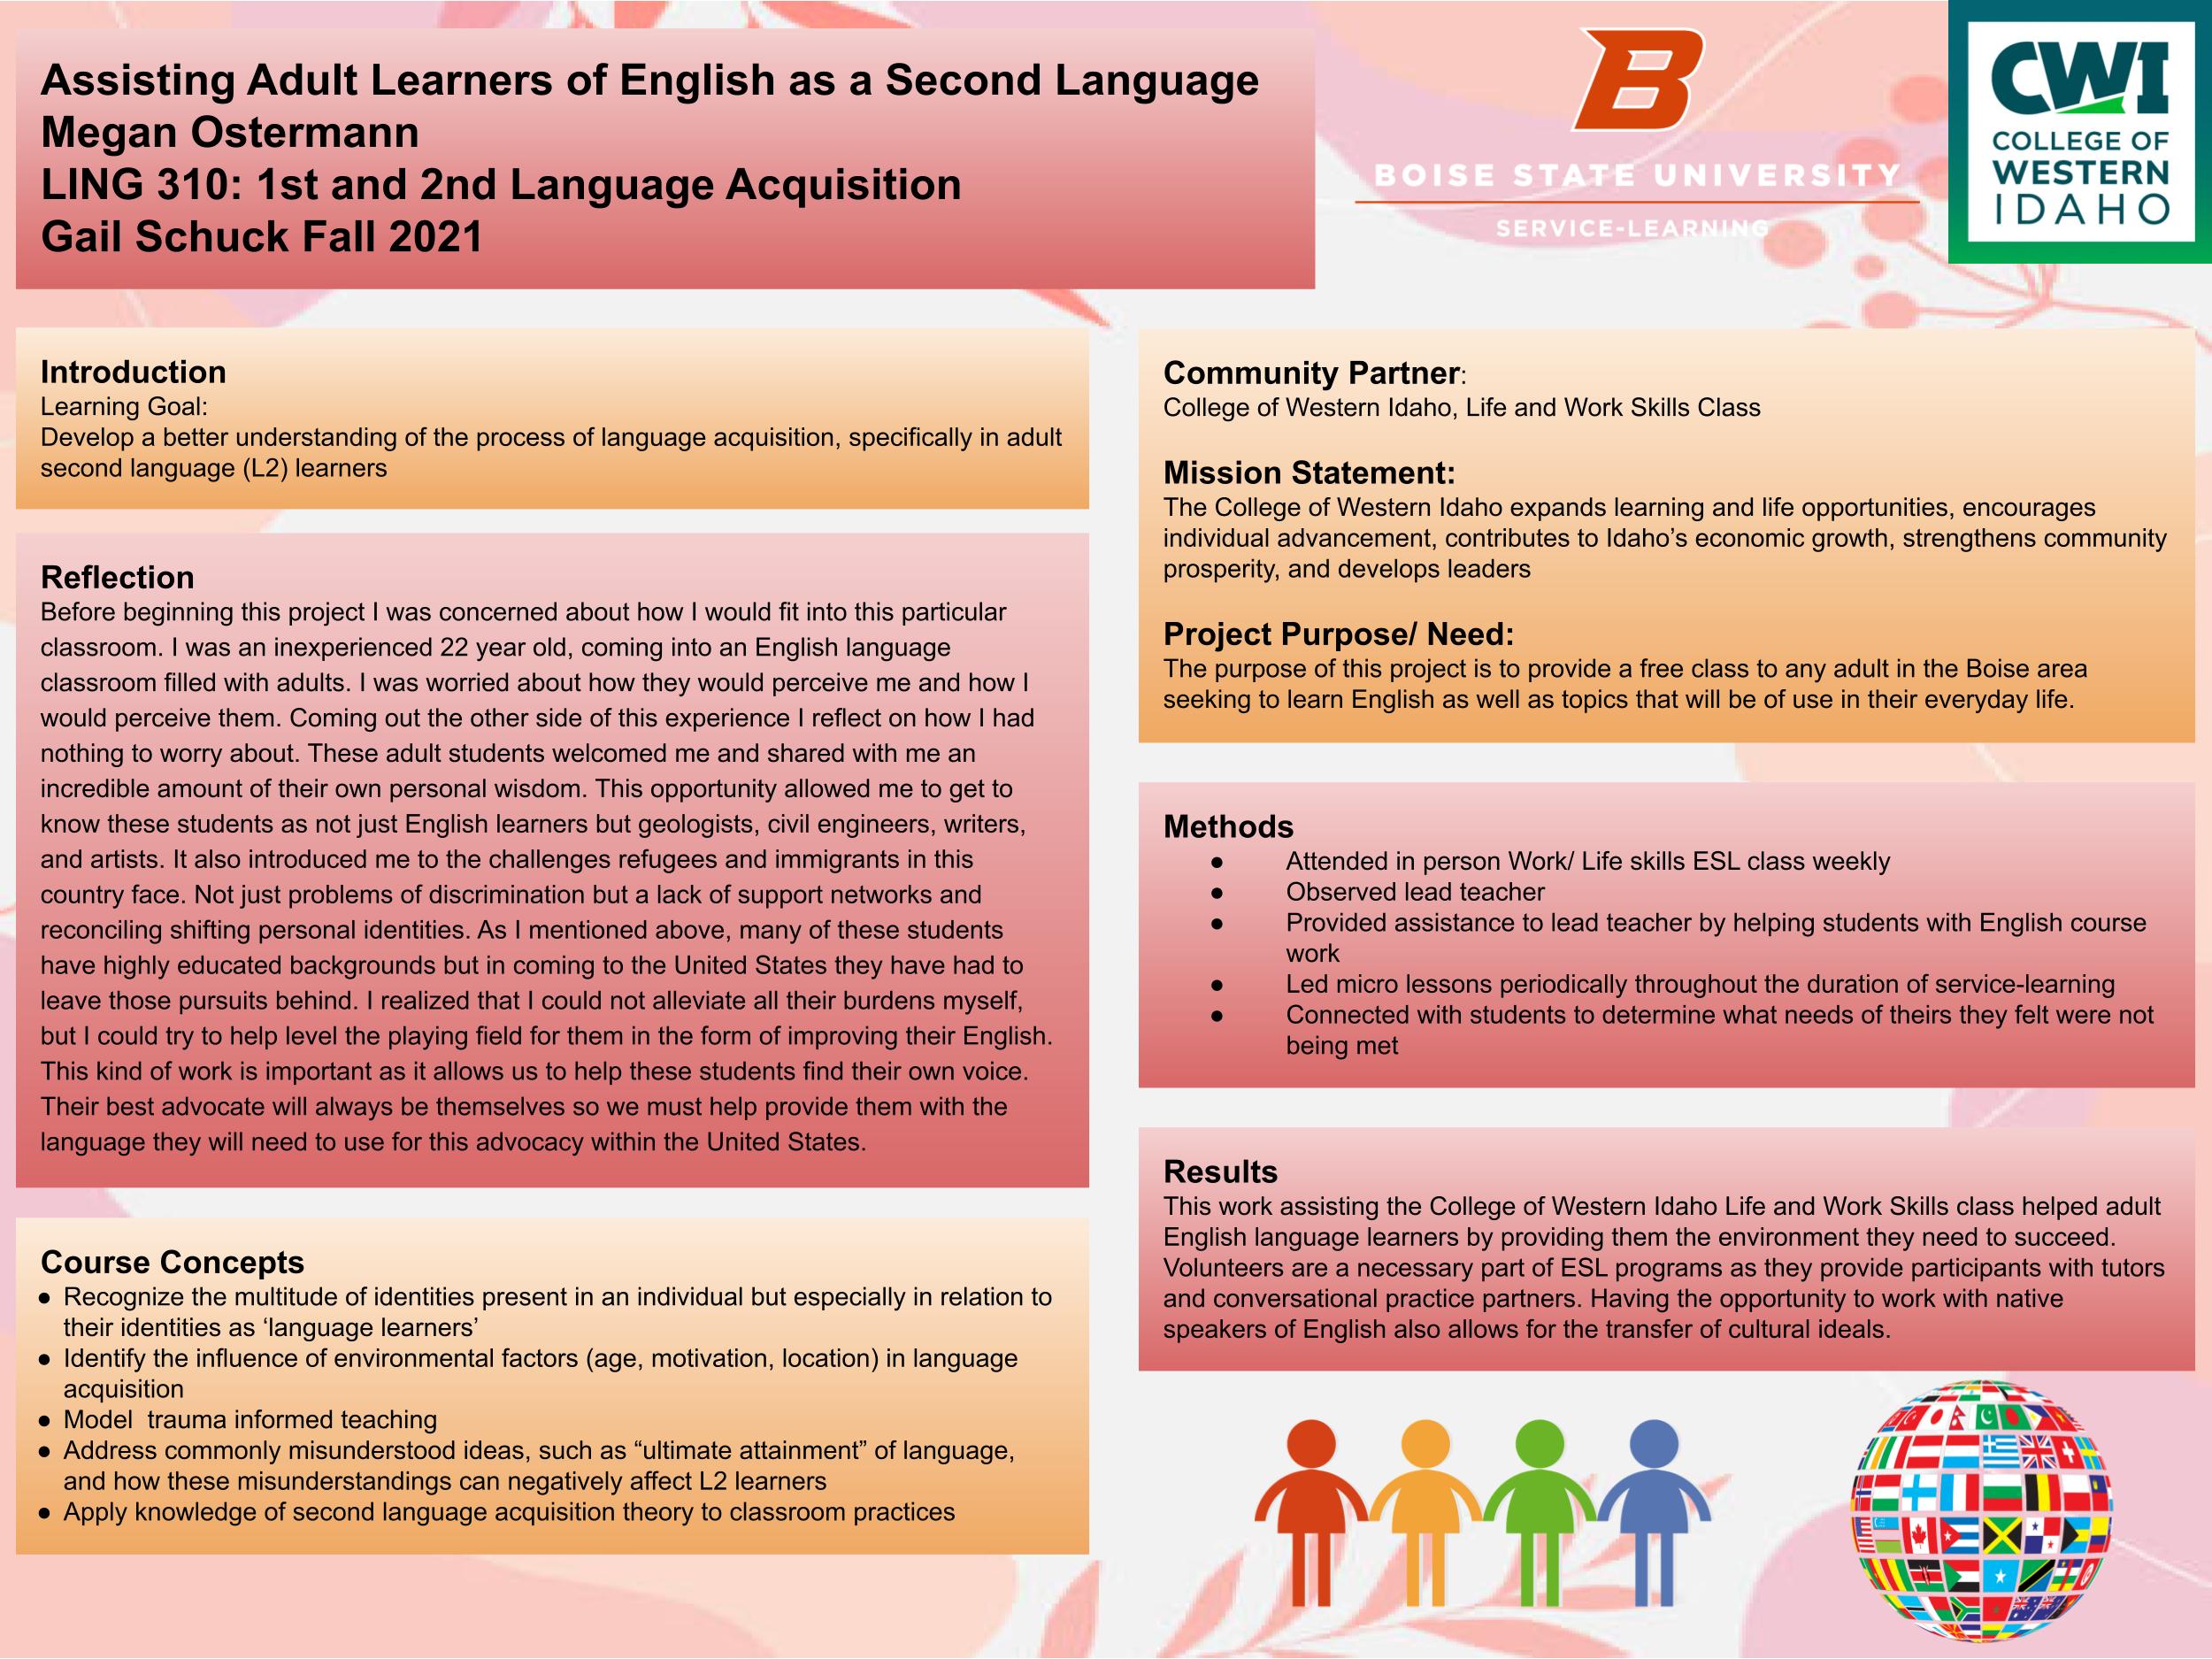 Image of student poster. Continue below for accessible text and full content.